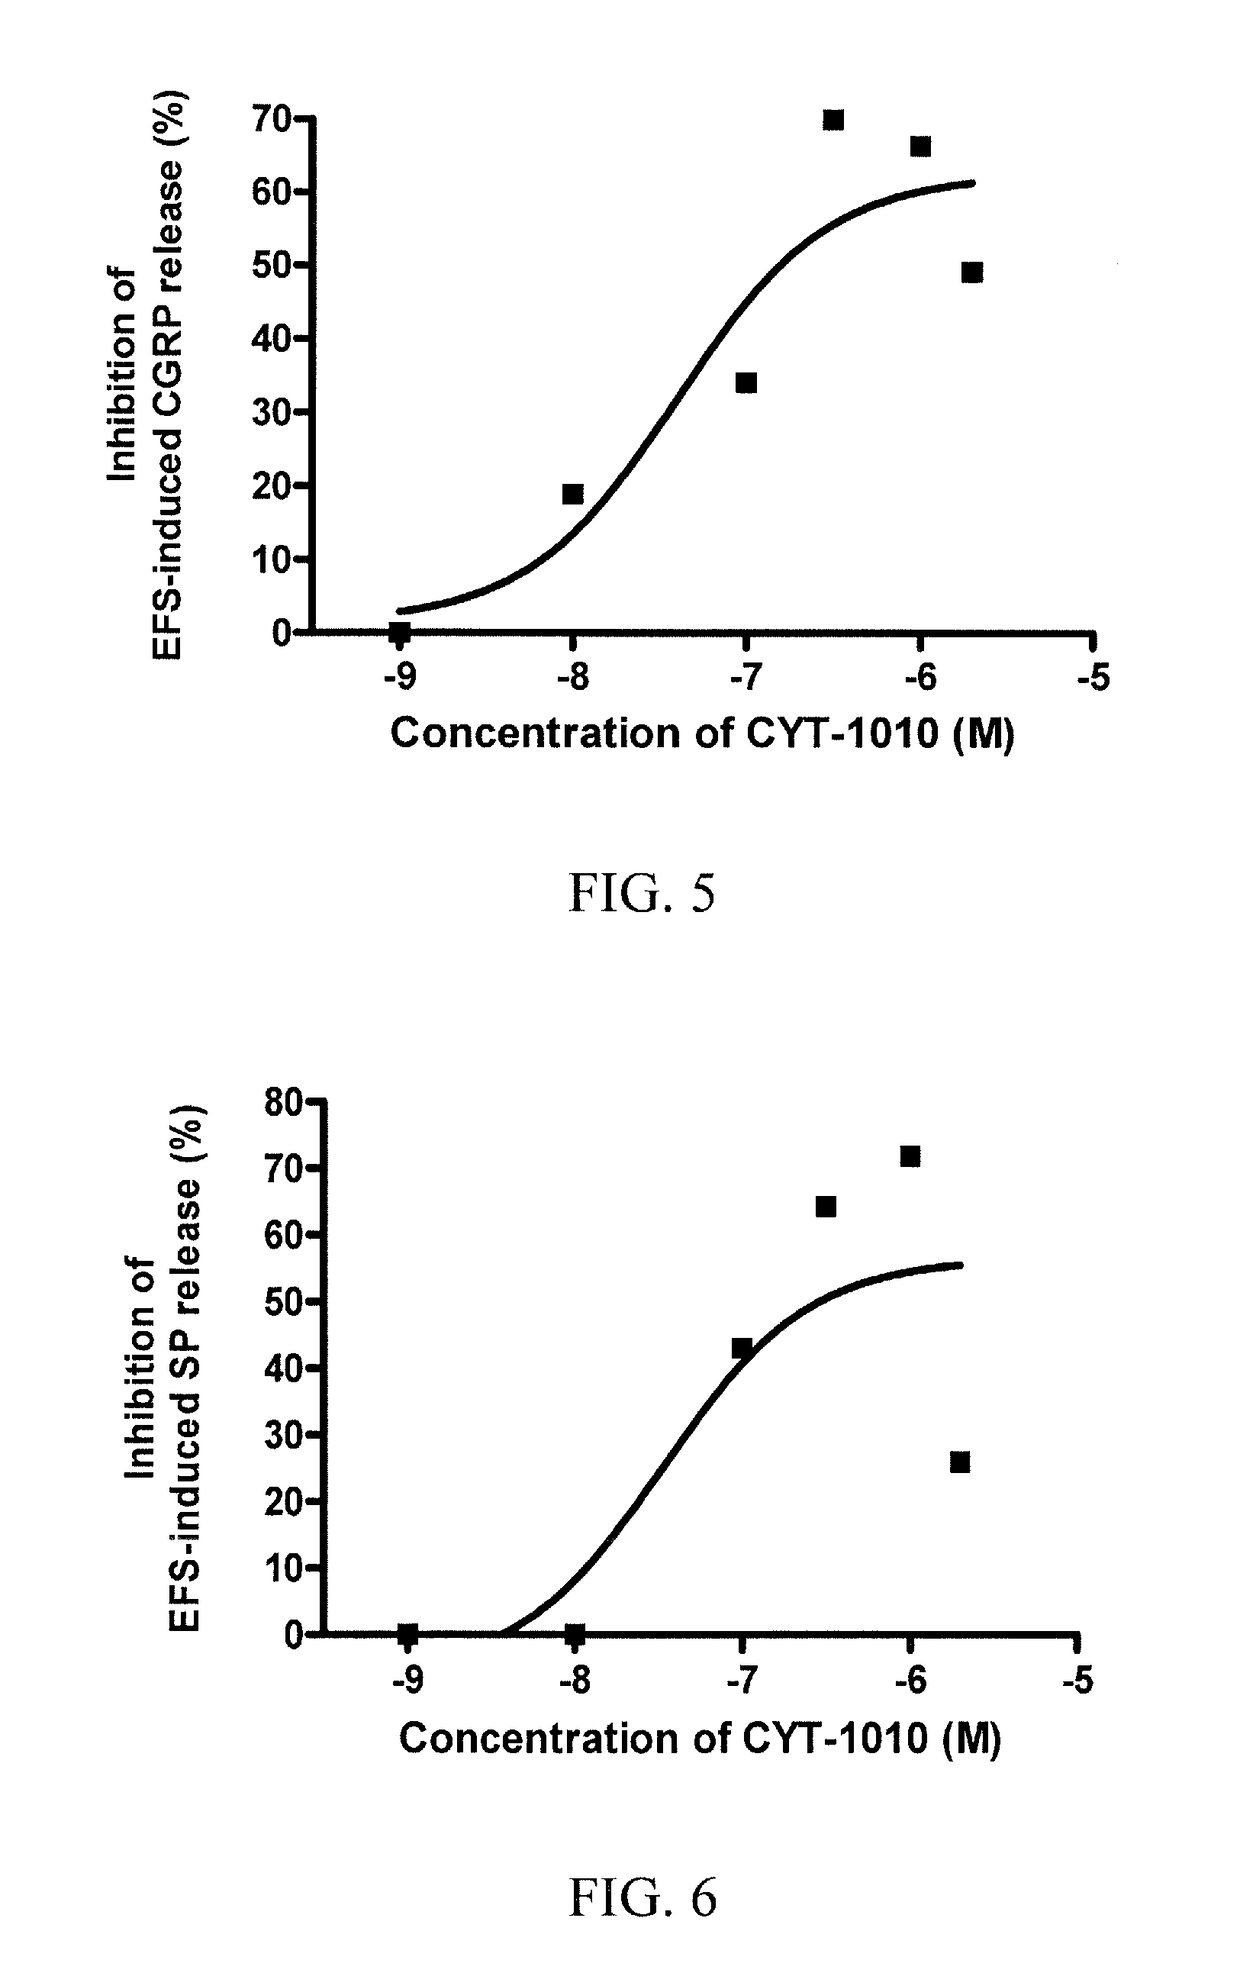 Materials and Methods for Treatment of Inflammation